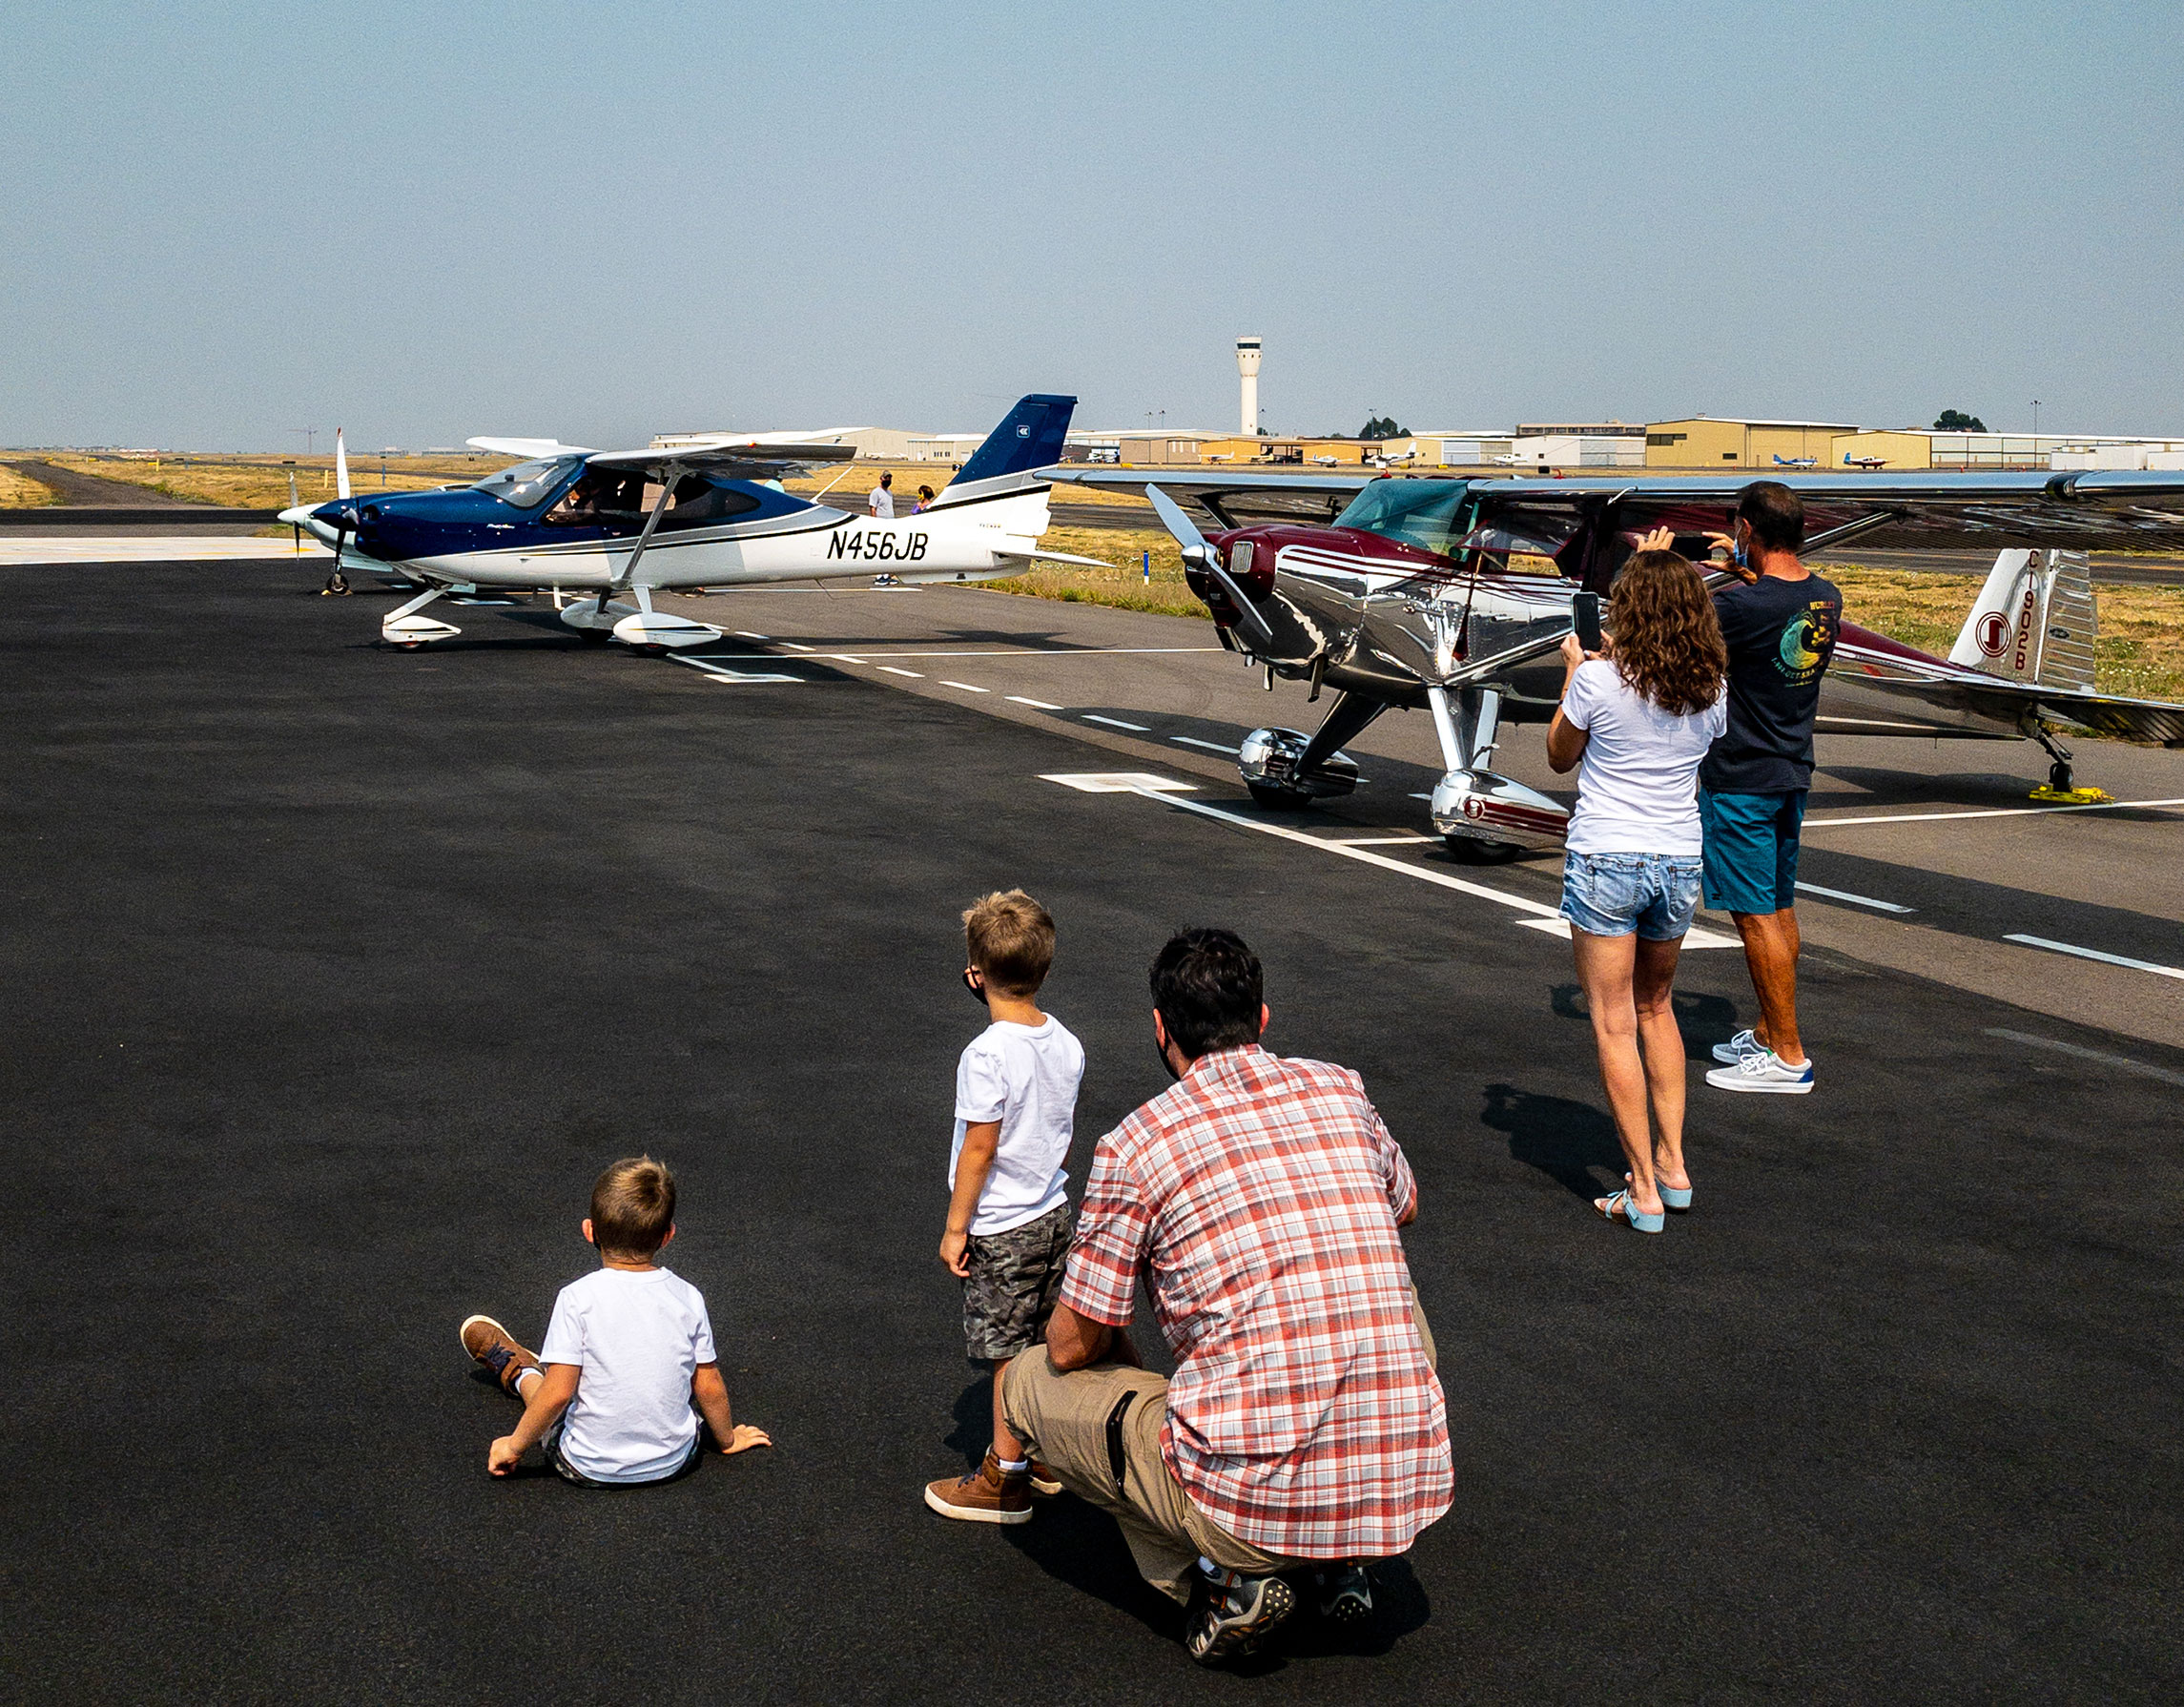 People viewing aircraft up close on the ramp